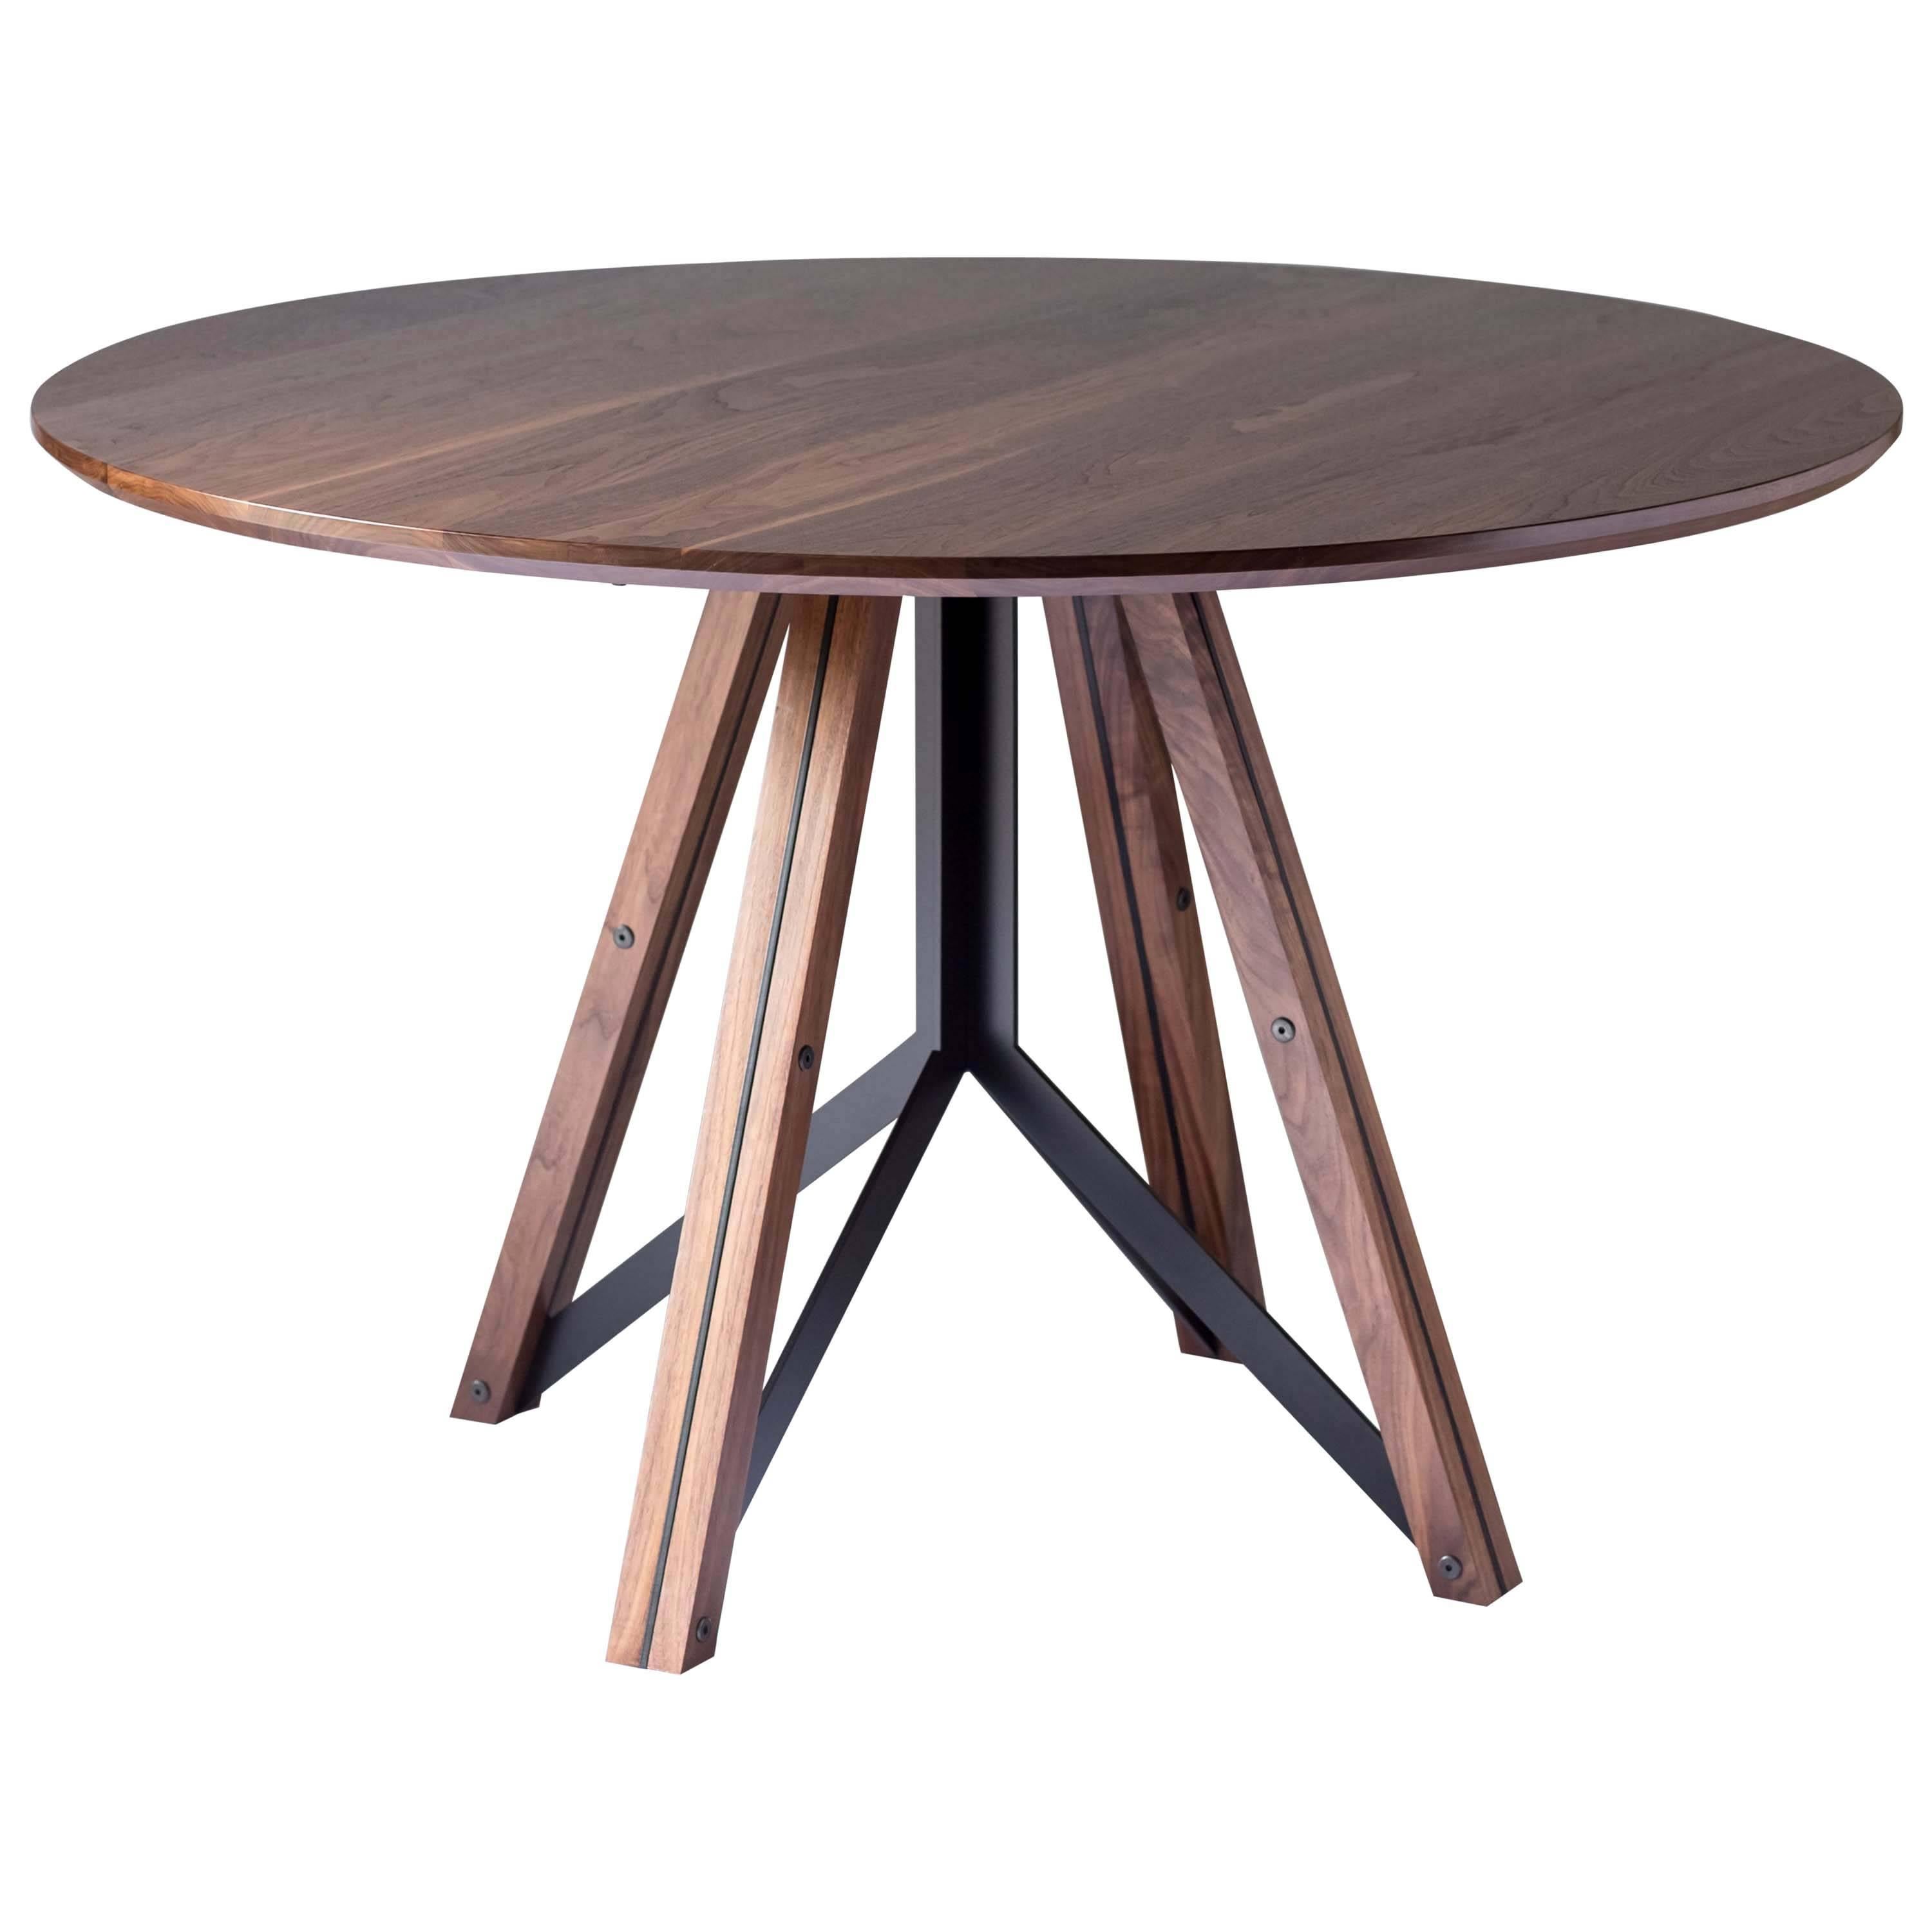 Trestle, Modern Walnut and Powder Coated Steel Round Dining Table